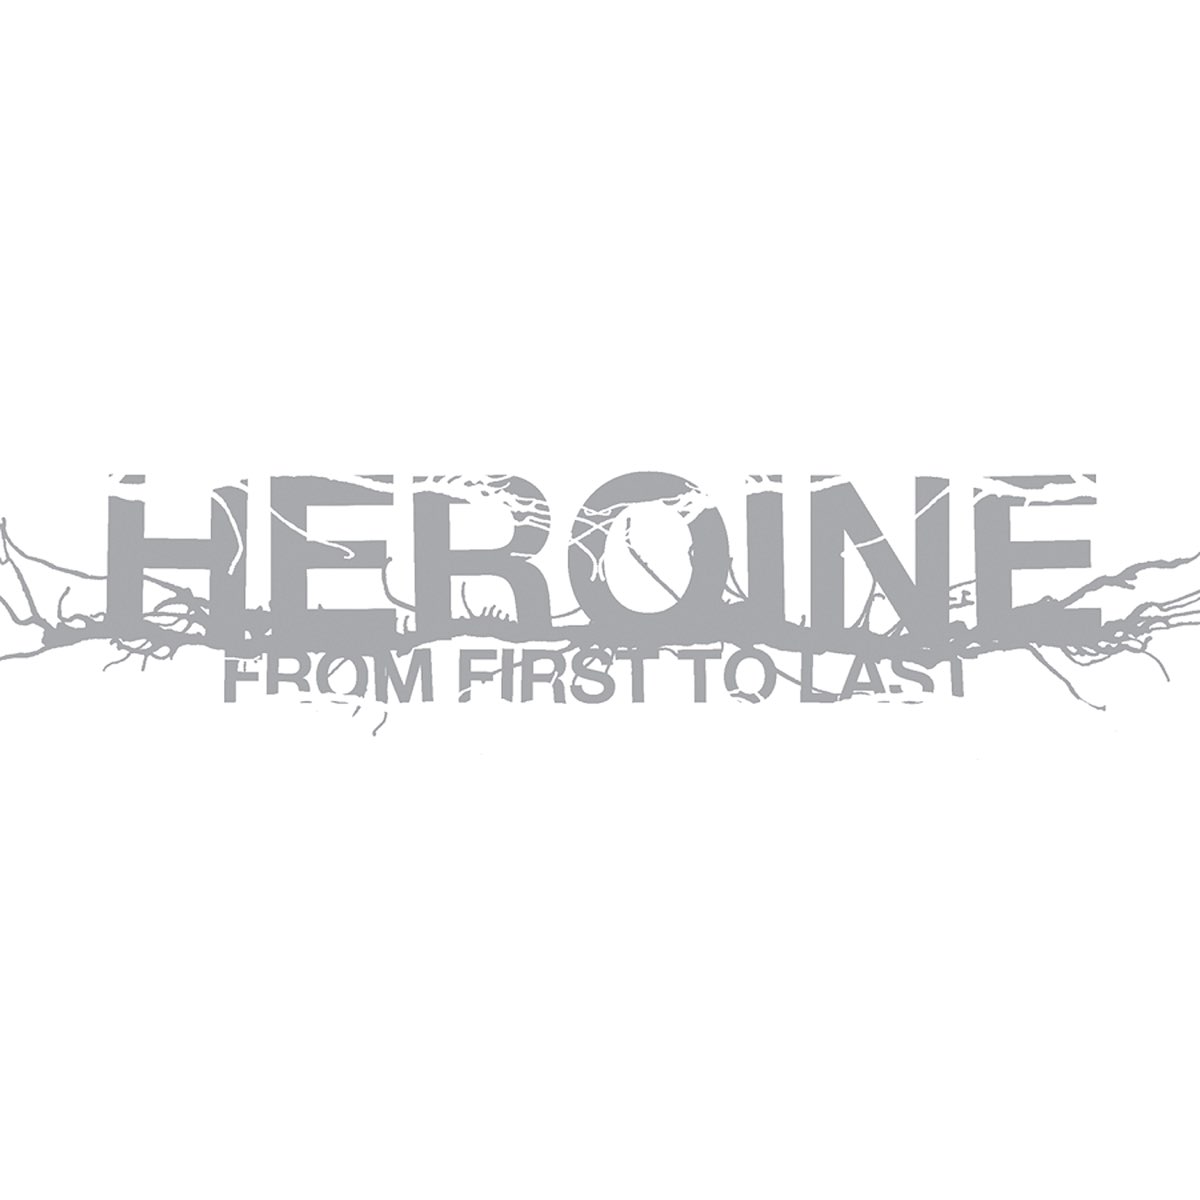 From First To Last Heroine cover artwork